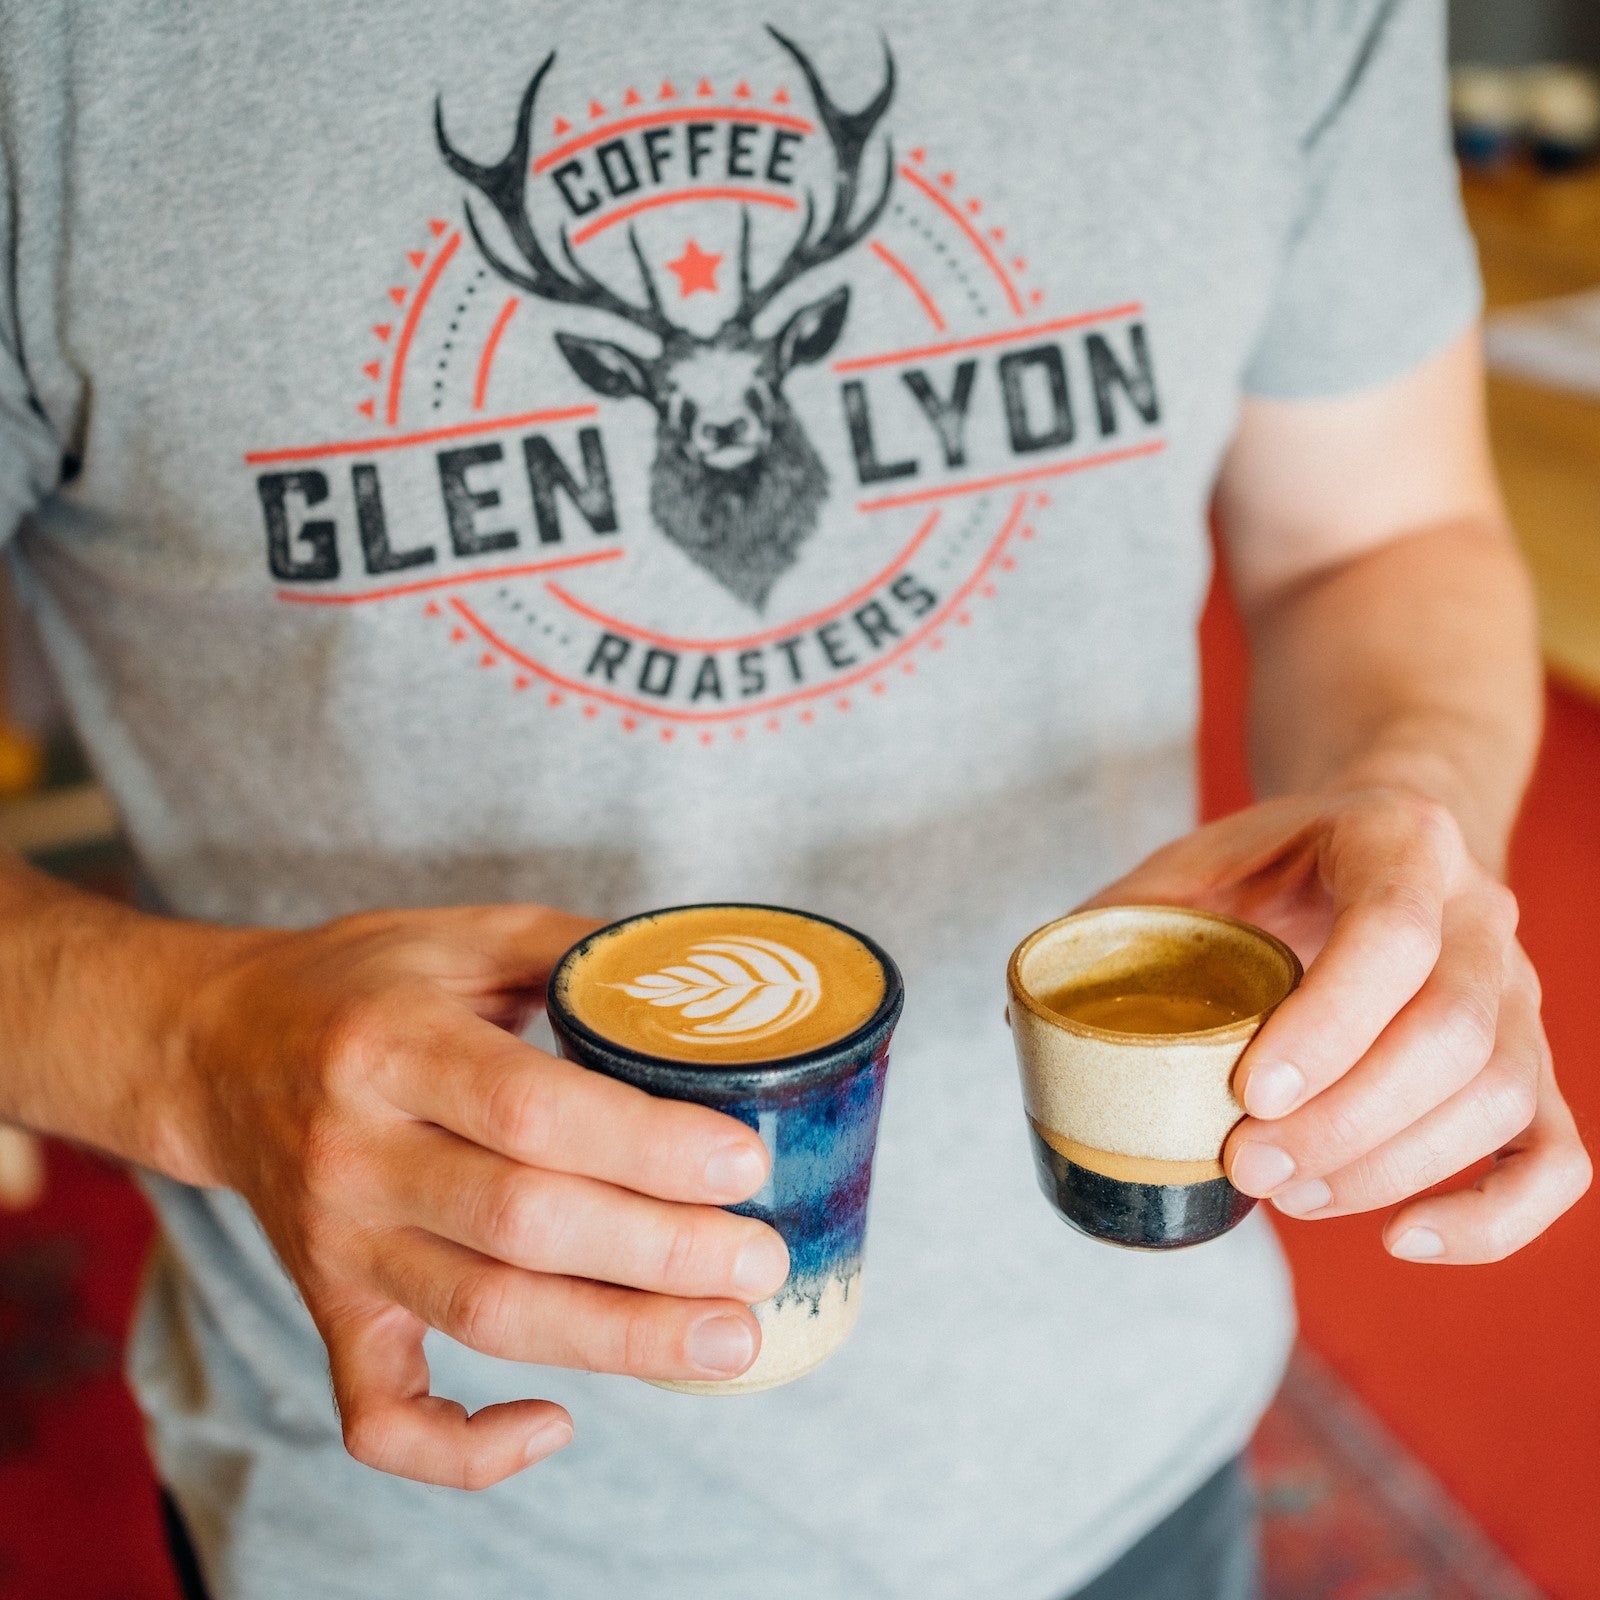 A person wearing a Glen Lyon Coffee Roasters T-Shirt carries a flat white and an espresso inside Glen Lyon Coffee Roasters roastery cafe in Aberfeldy